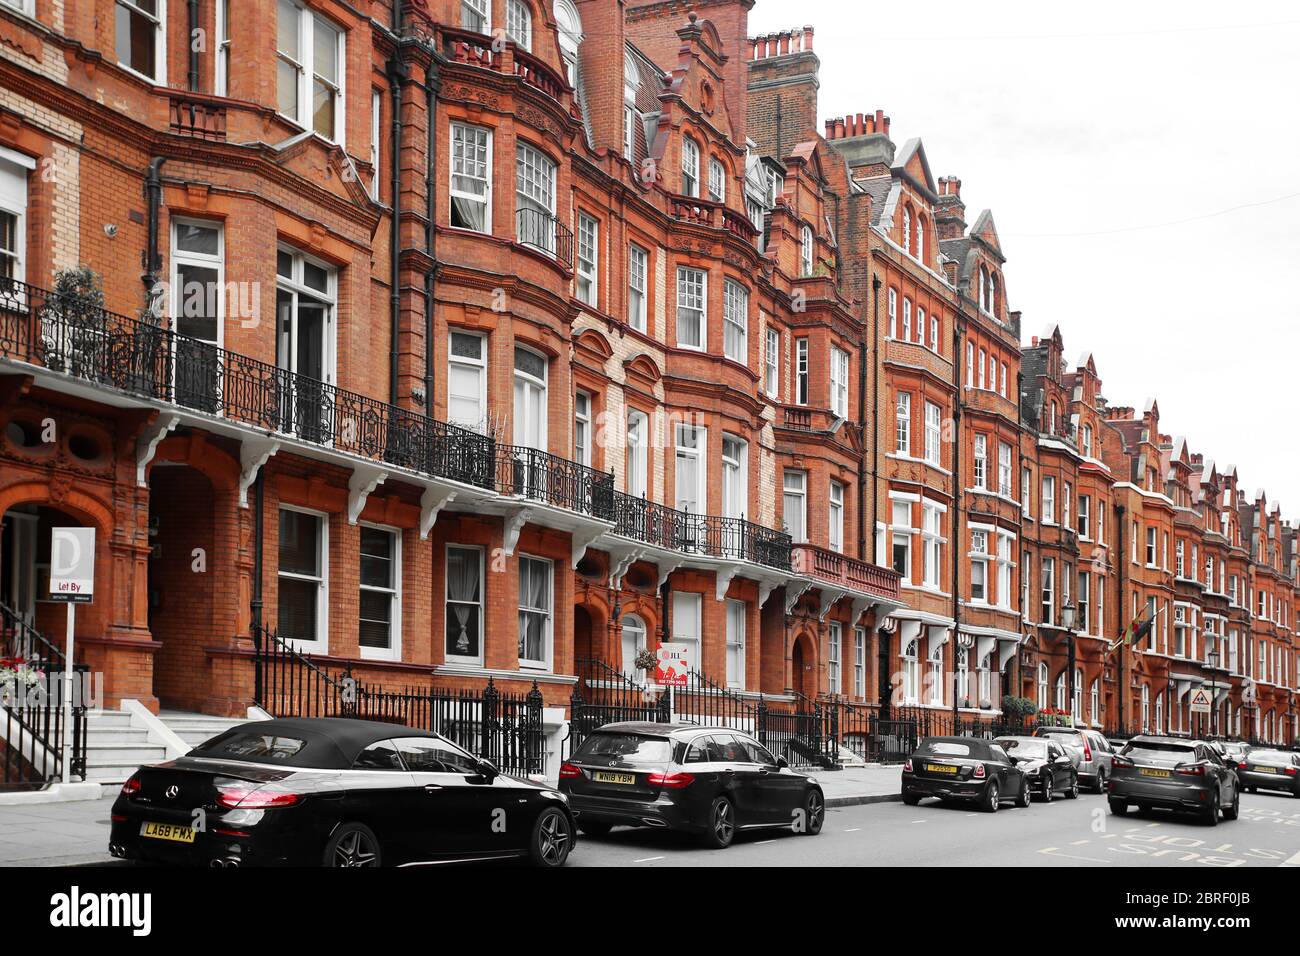 Brick row houses along Draycott Place and Cadogan Gardens near Cadogan Square in the affluent and exclusive neighborhood of Chelsea, London Stock Photo